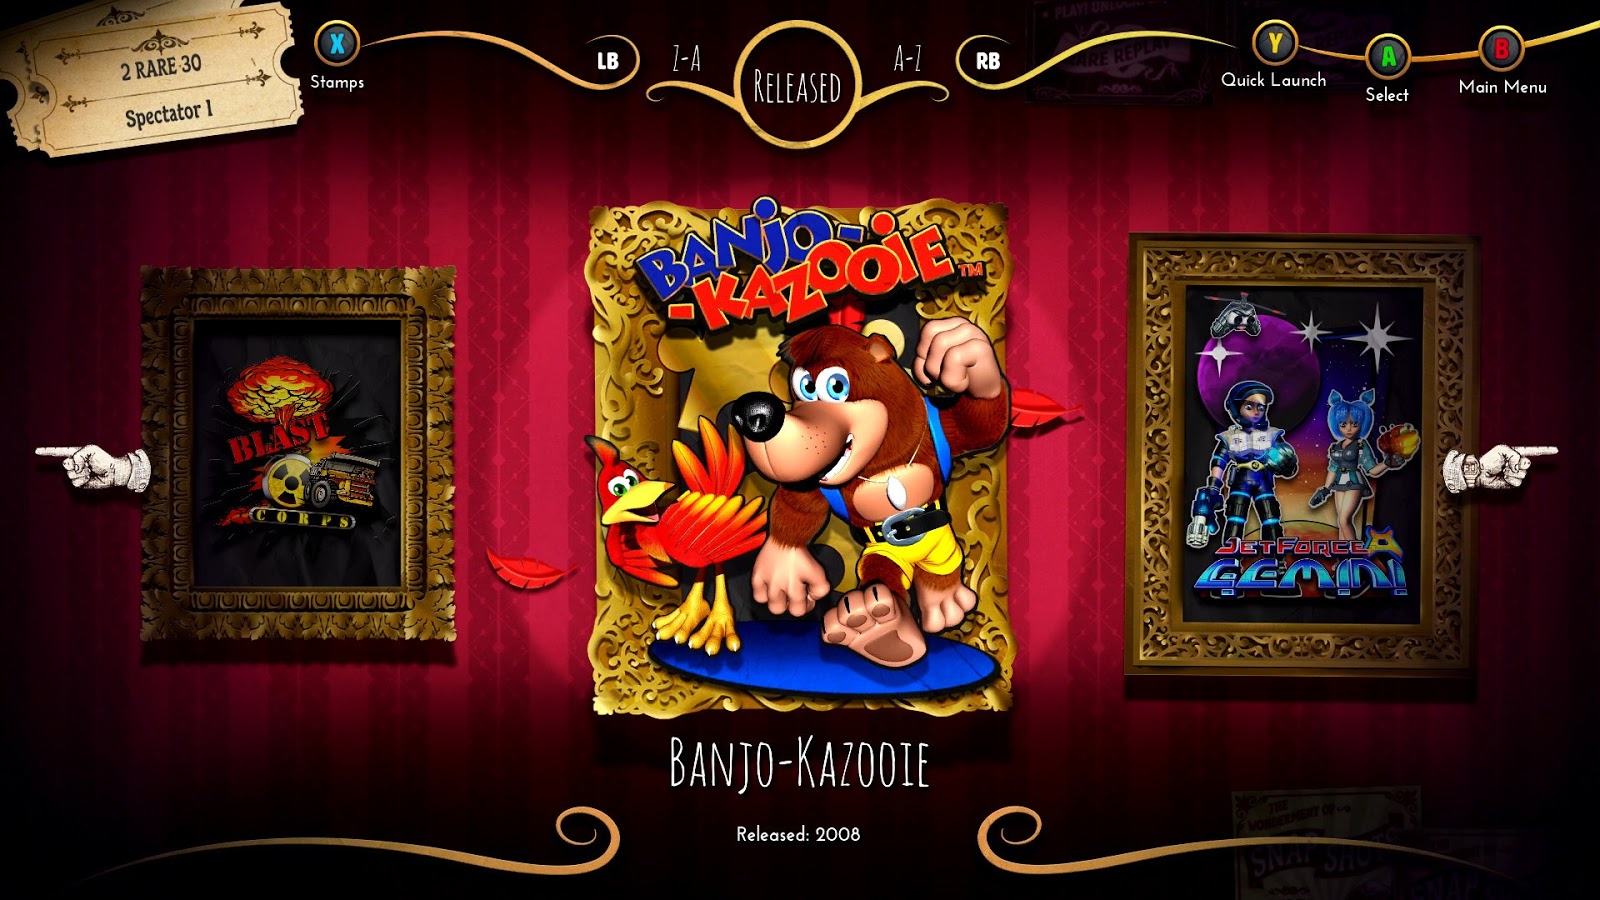 Relive some classic gaming this weekend, when Banjo-Kazooie hits